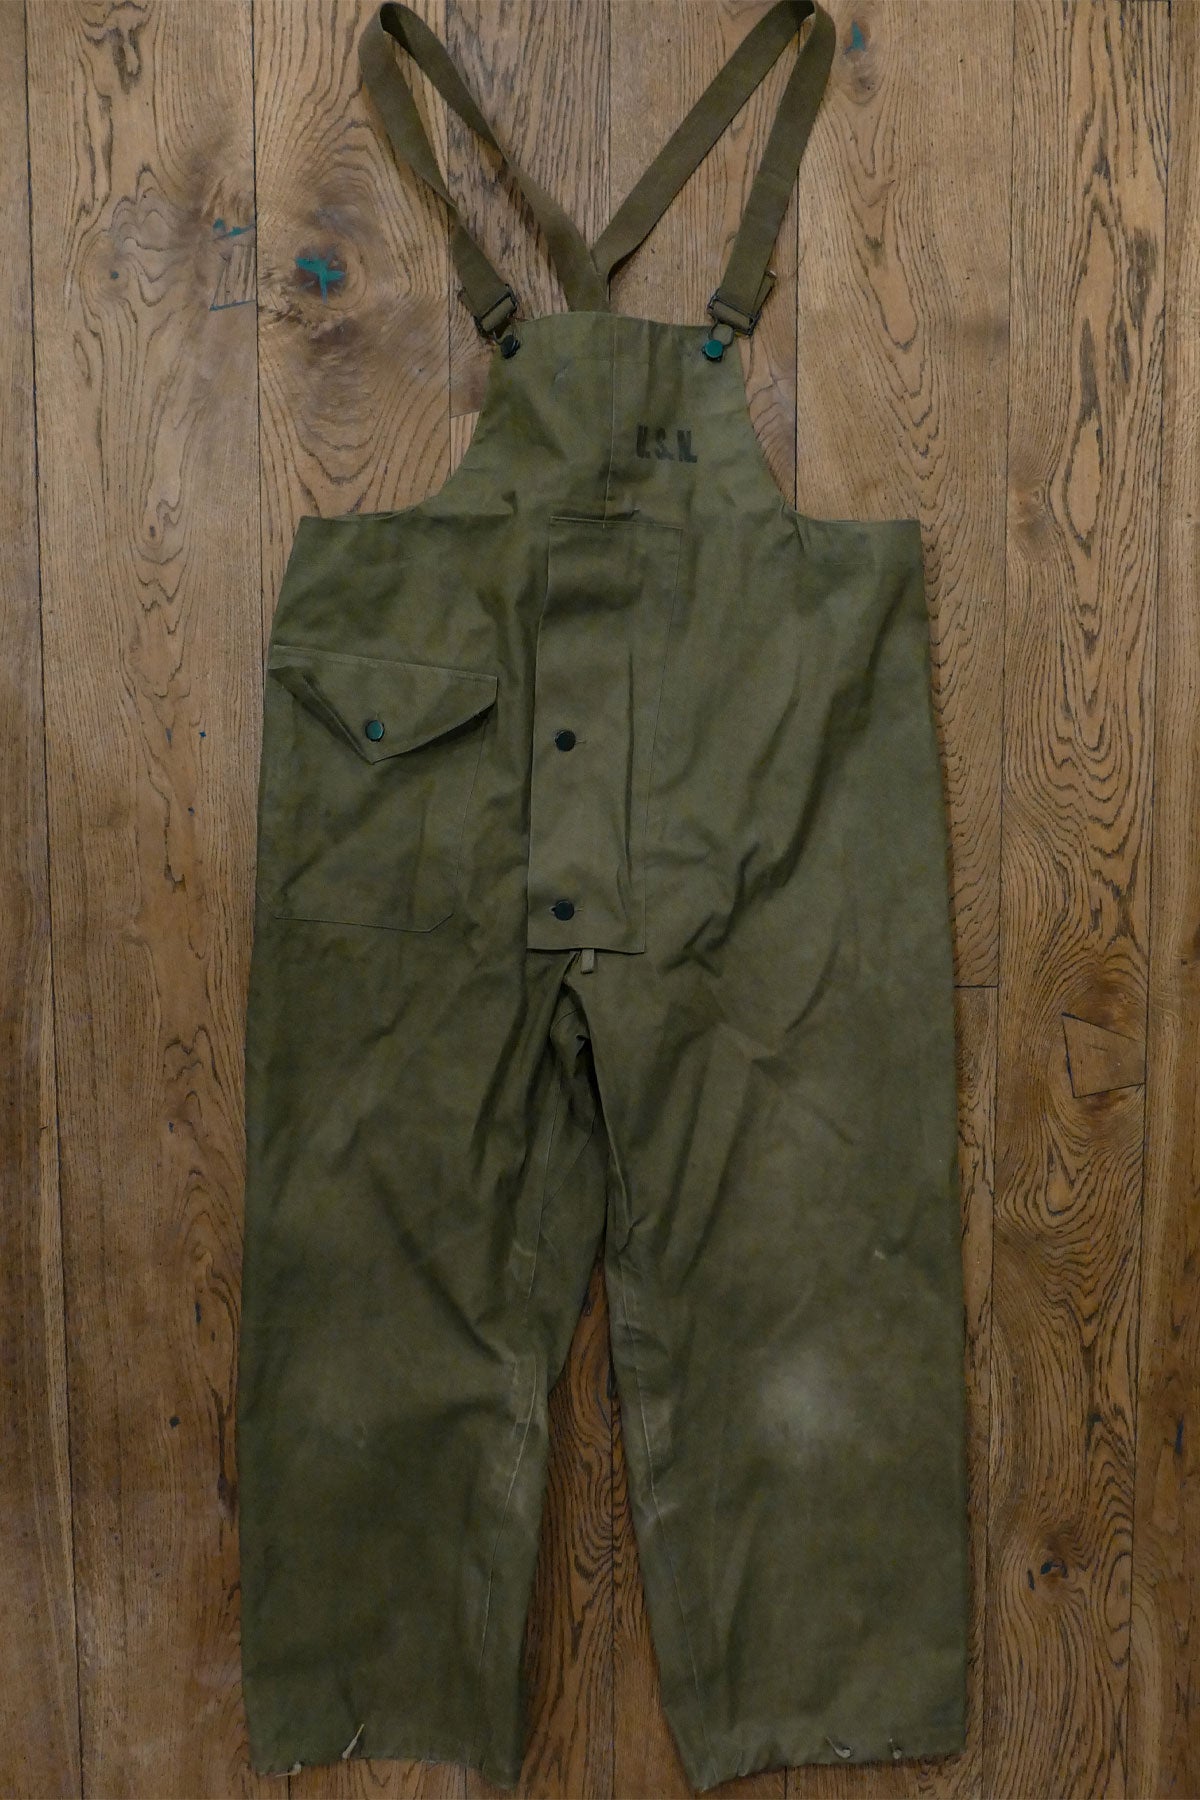 1944 WW2 Vintage US Navy Wet Weather Deck Trousers / Dungarees / Bib - Size Large